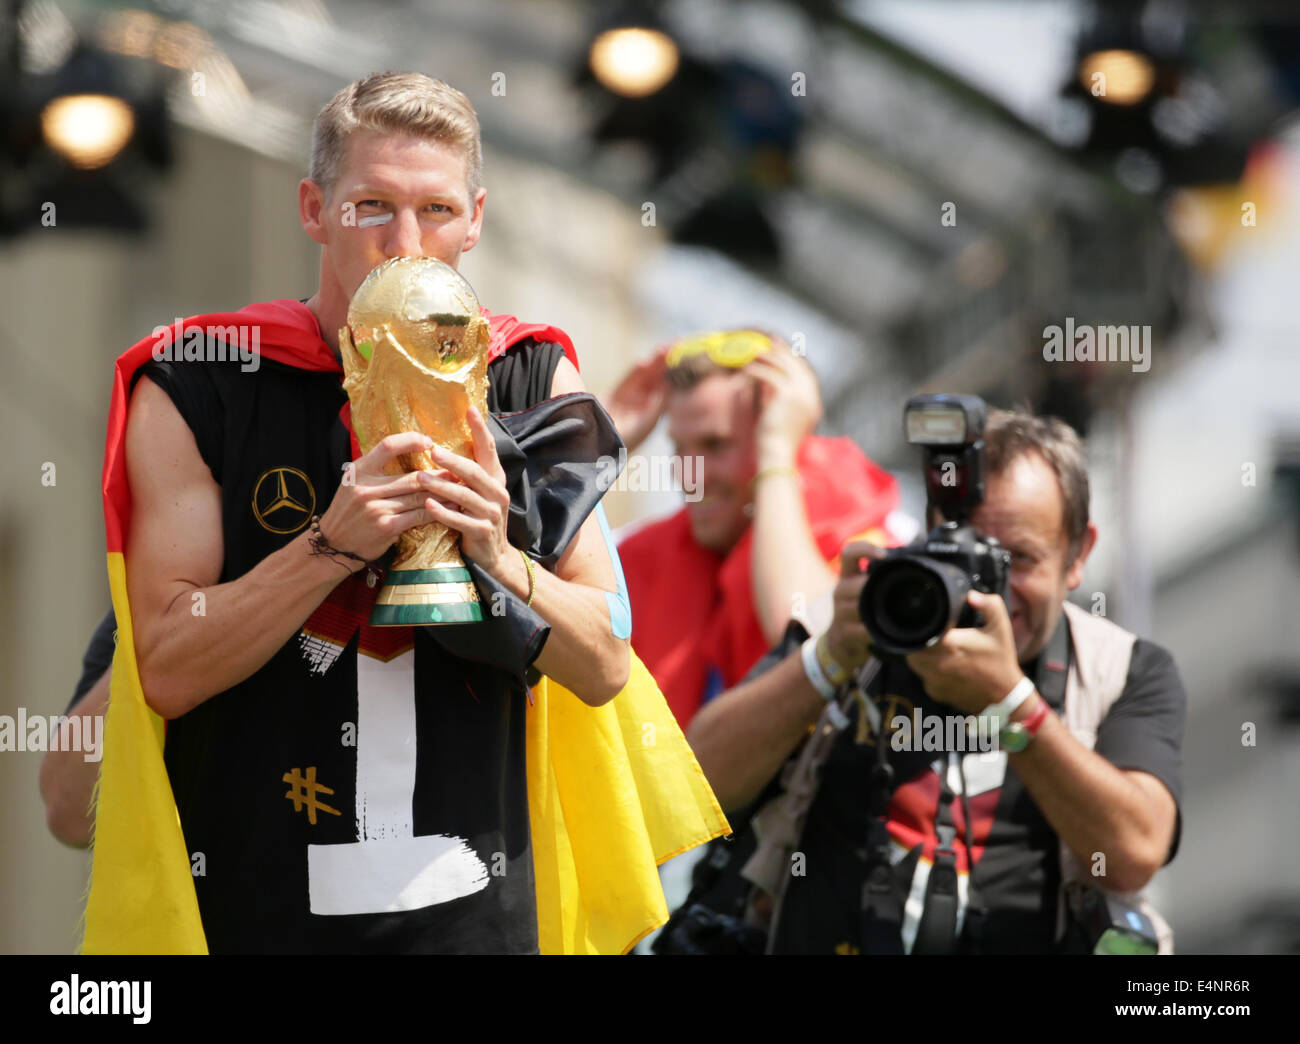 Berlin, Germany. 15th July, 2014. Germany's Bastian Schweinsteiger (L) kisses the World Cup trophy on stage during the welcome reception for Germany's national soccer team in front of the Brandenburg Gate, Berlin, Germany, 15 July 2014. The German team won the Brazil 2014 FIFA Soccer World Cup final against Argentina by 1-0 on 13 July 2014, winning the world cup title for the fourth time after 1954, 1974 and 1990. Photo: Michael Kappeler/dpa/Alamy Live News Stock Photo